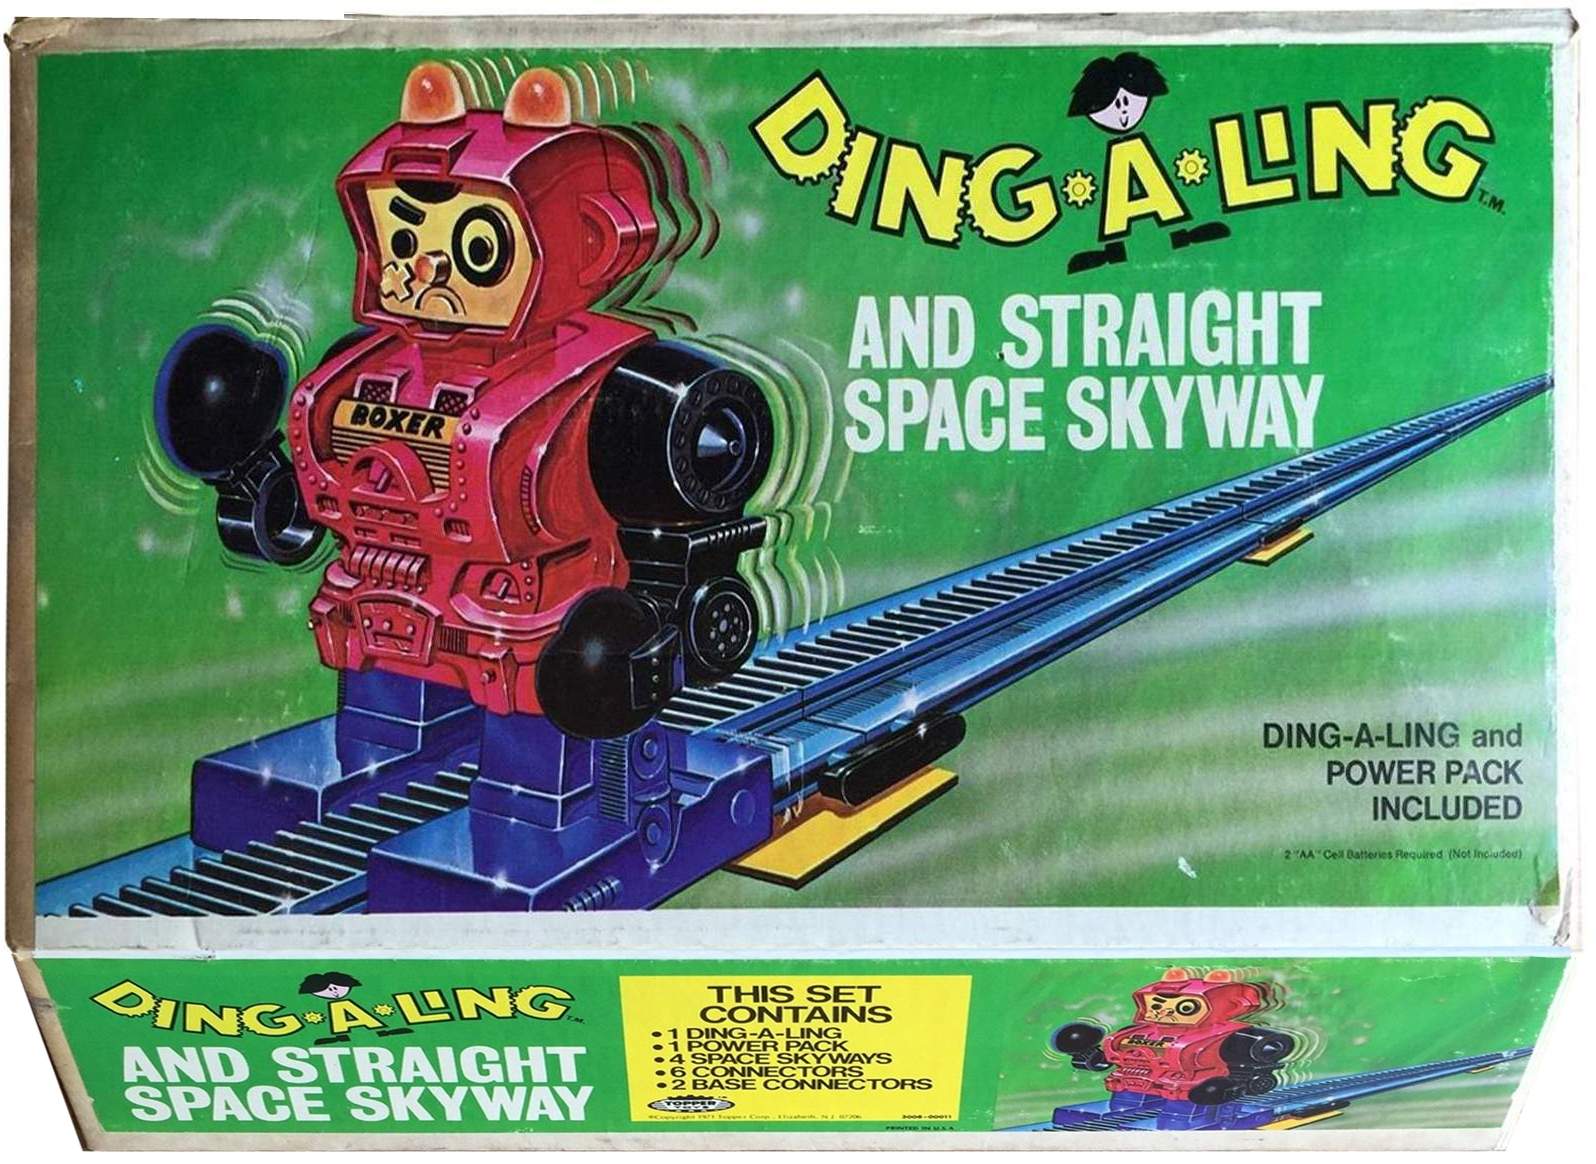 Ding-A-Ling Robots by Topper Toys - Ding-A-Ling Robots were produced